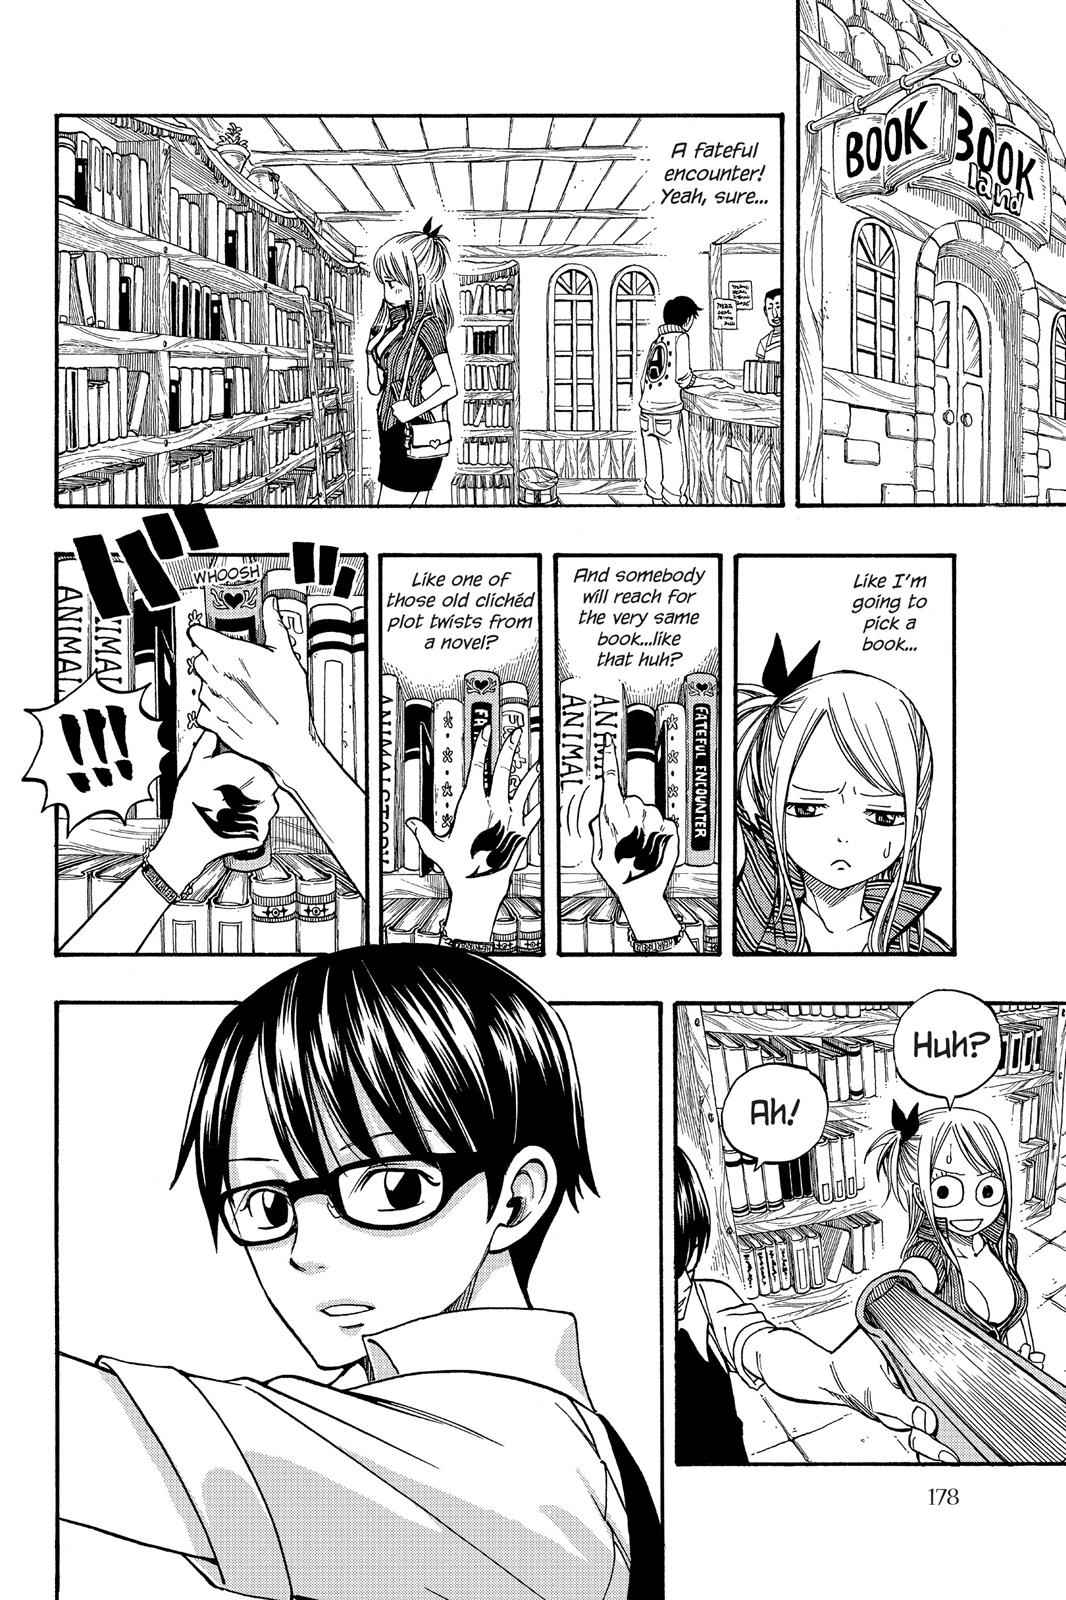  Chapter 160.5 image 004